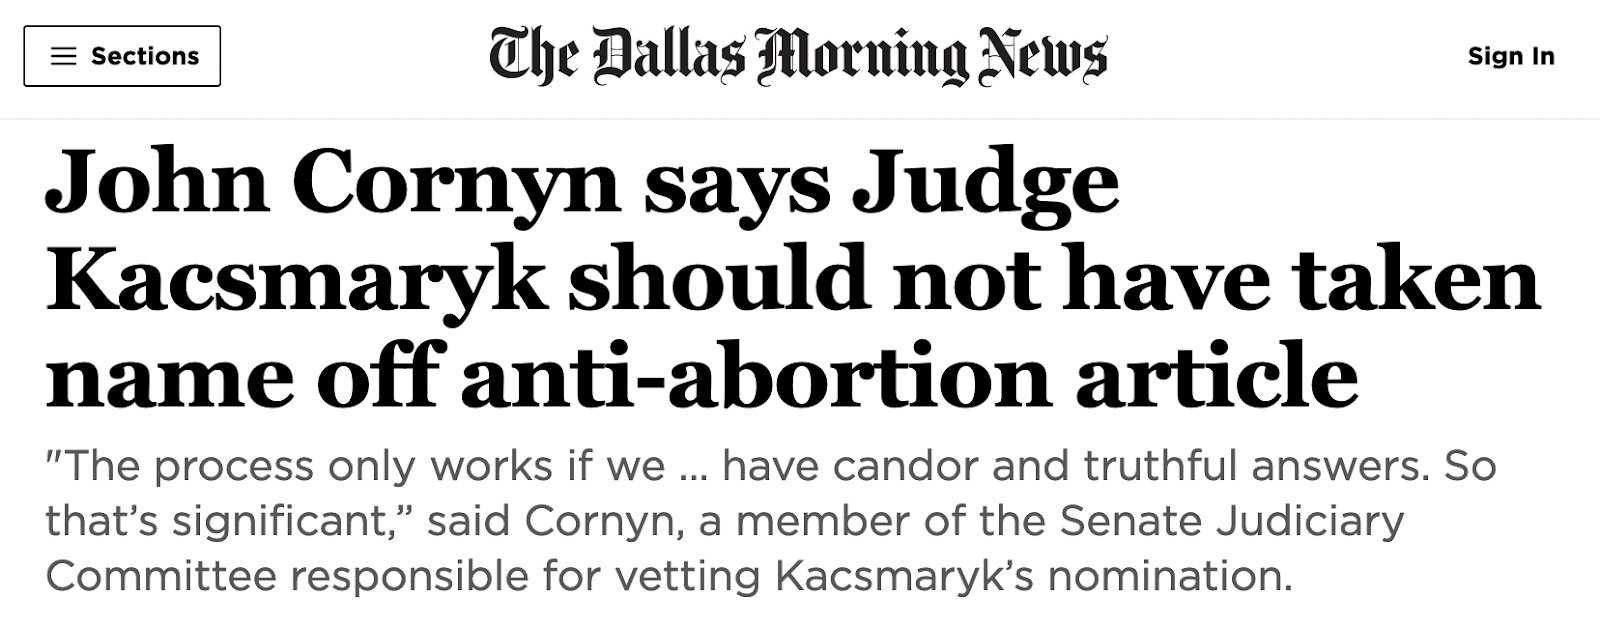 Headline from The Dallas Morning News: John Cornyn says Judge Kacsmaryk should not have taken name off anti-abortion article. Excerpt: 'The process only works if we... have candor and truthful answers. So that's significant,' said Cornyn, a member of the Senate Judiciary Committee responsible for vetting Kacsmaryk's nomination.